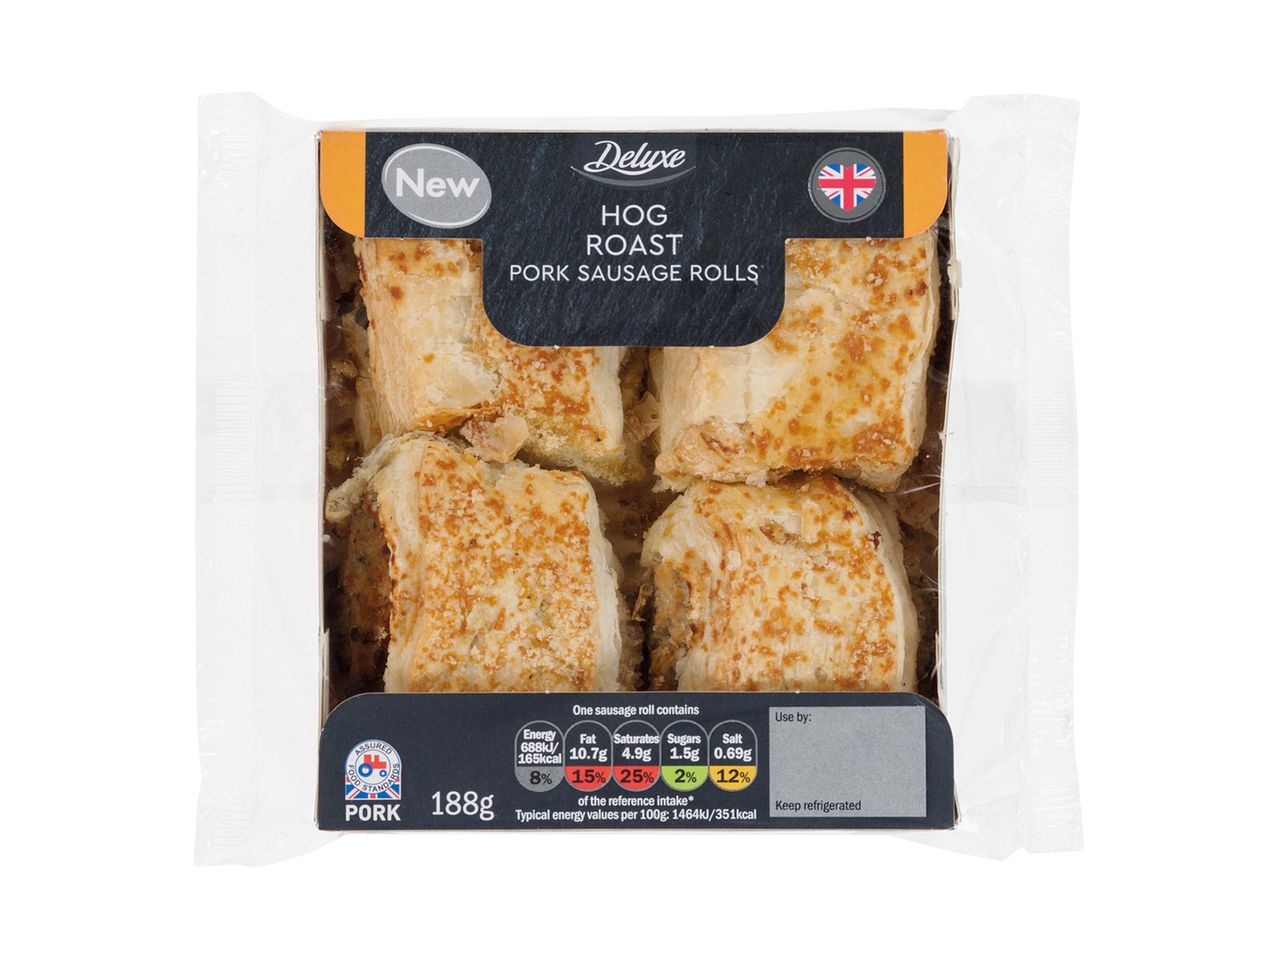 Go to full screen view: Deluxe Premium Sausage Rolls - Image 1